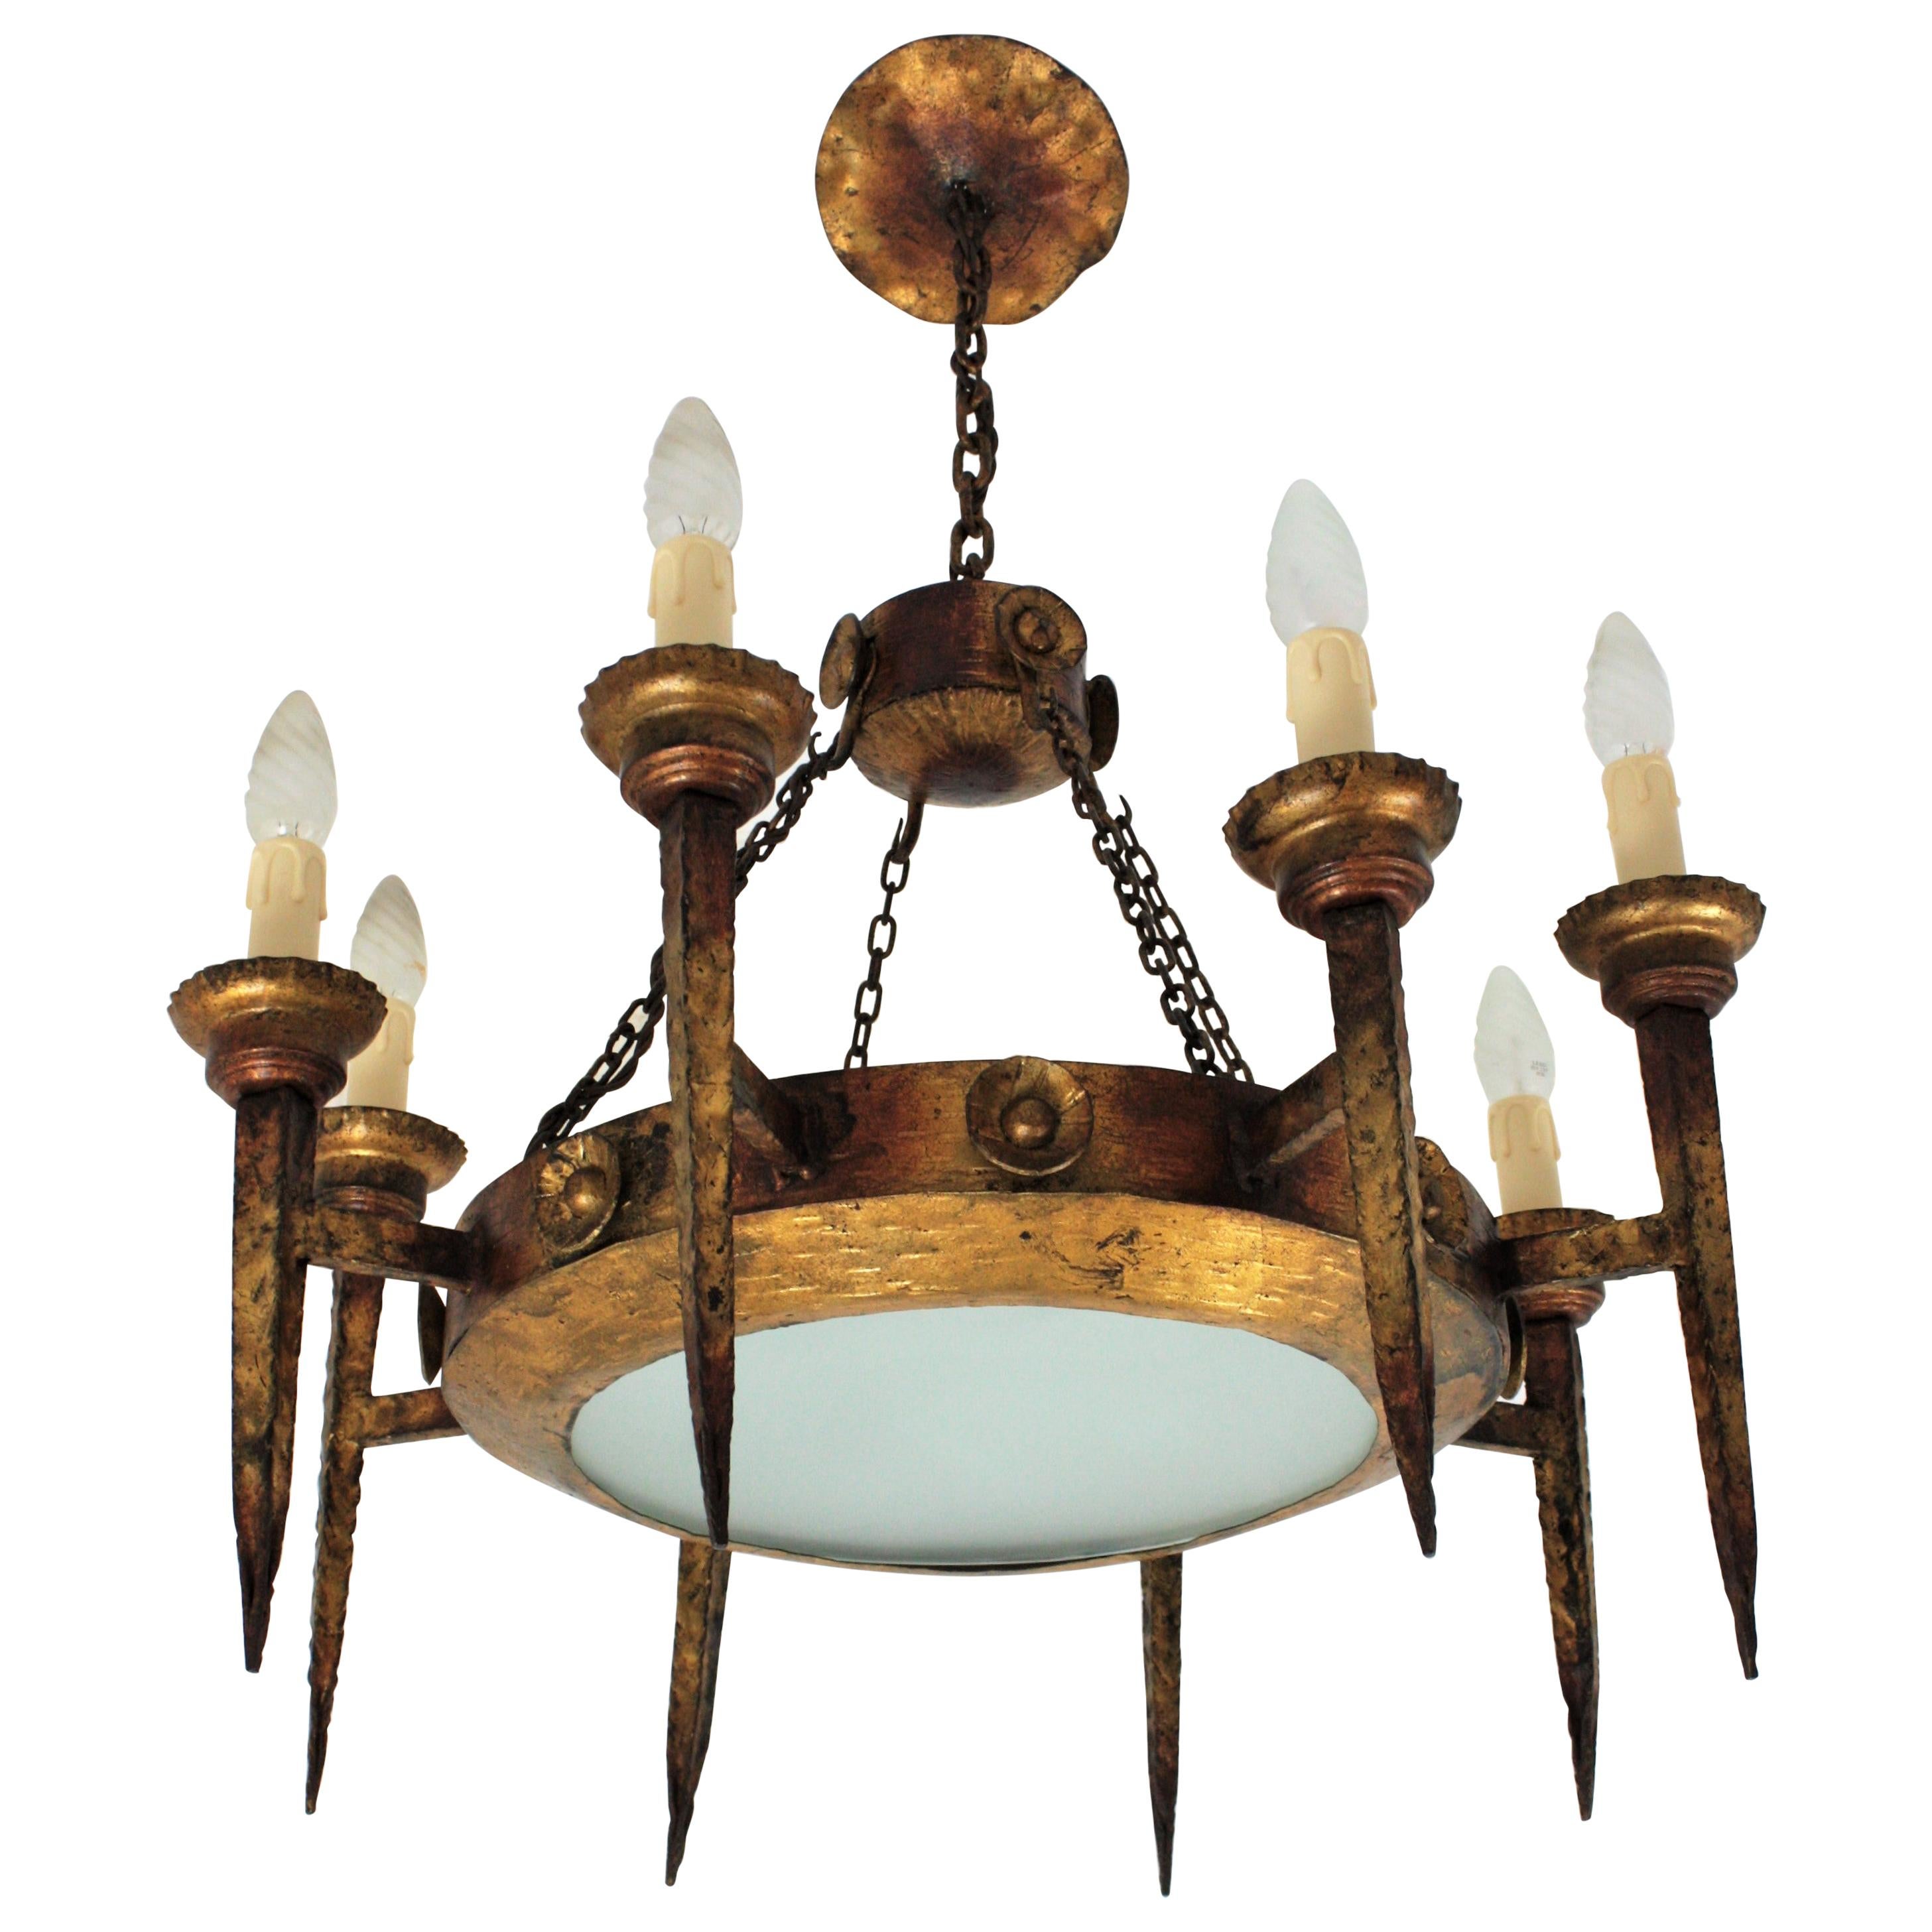 Spanish Gothic Revival Ring Torch Chandelier, Gilt Wrought Iron